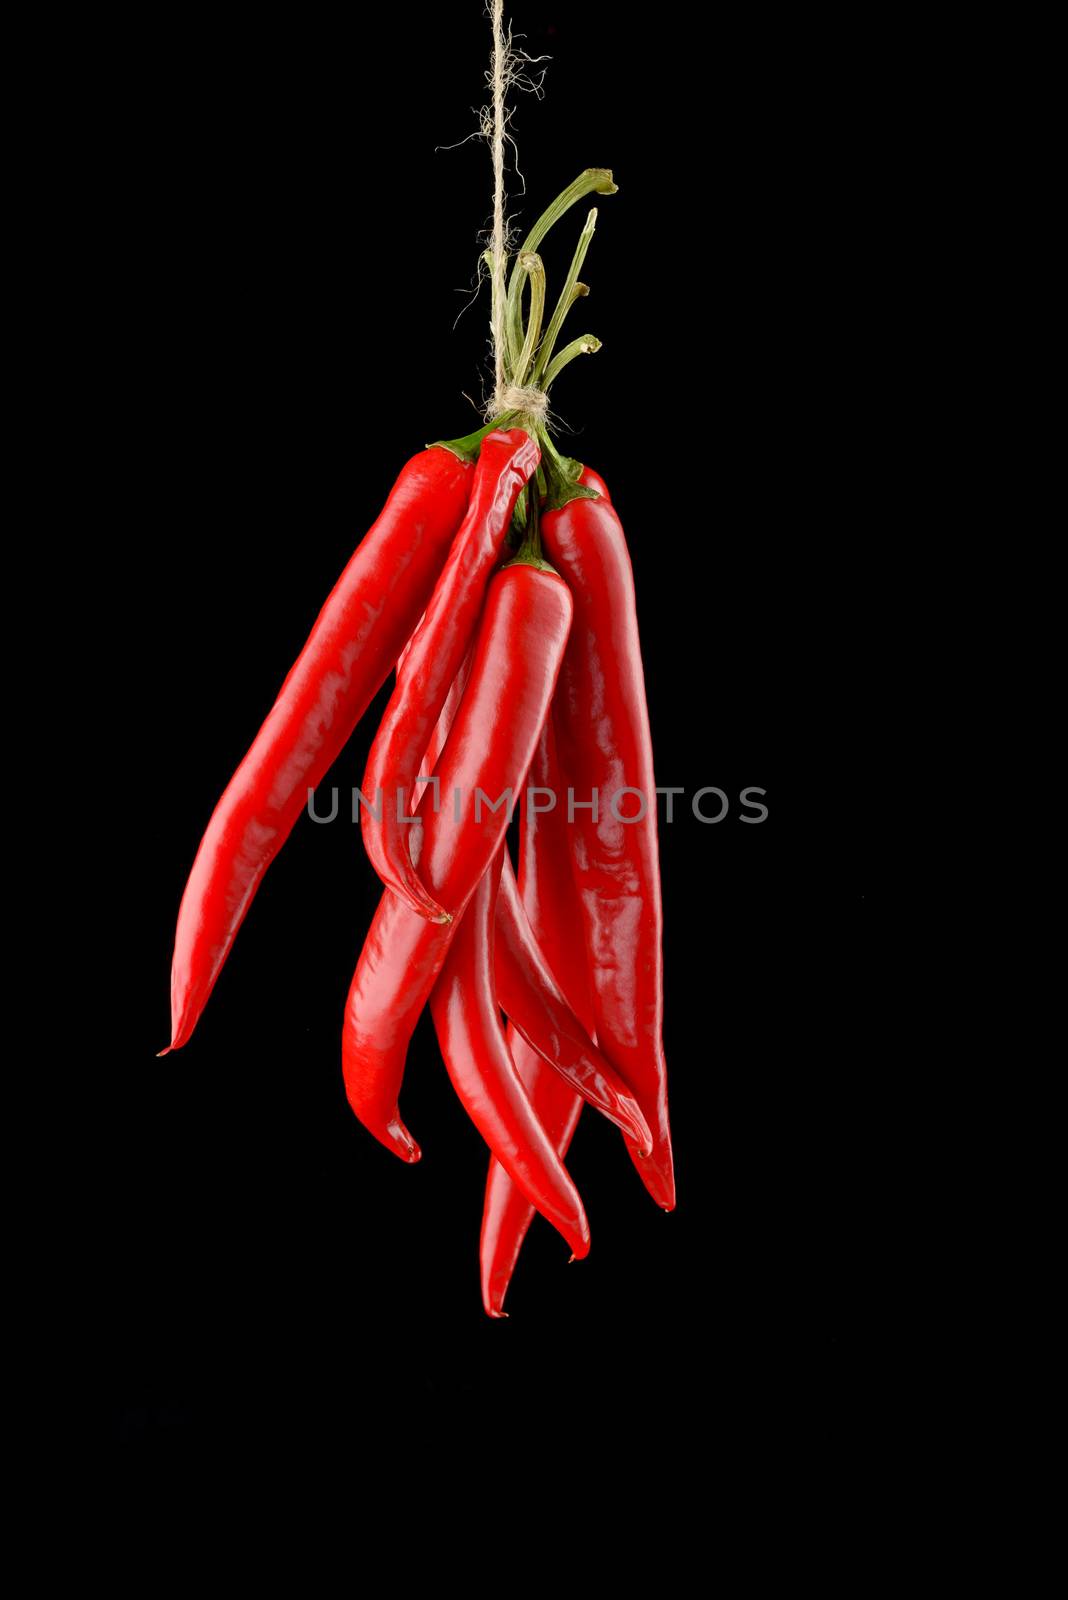 Hanged hot red chili peppers isolated on black background